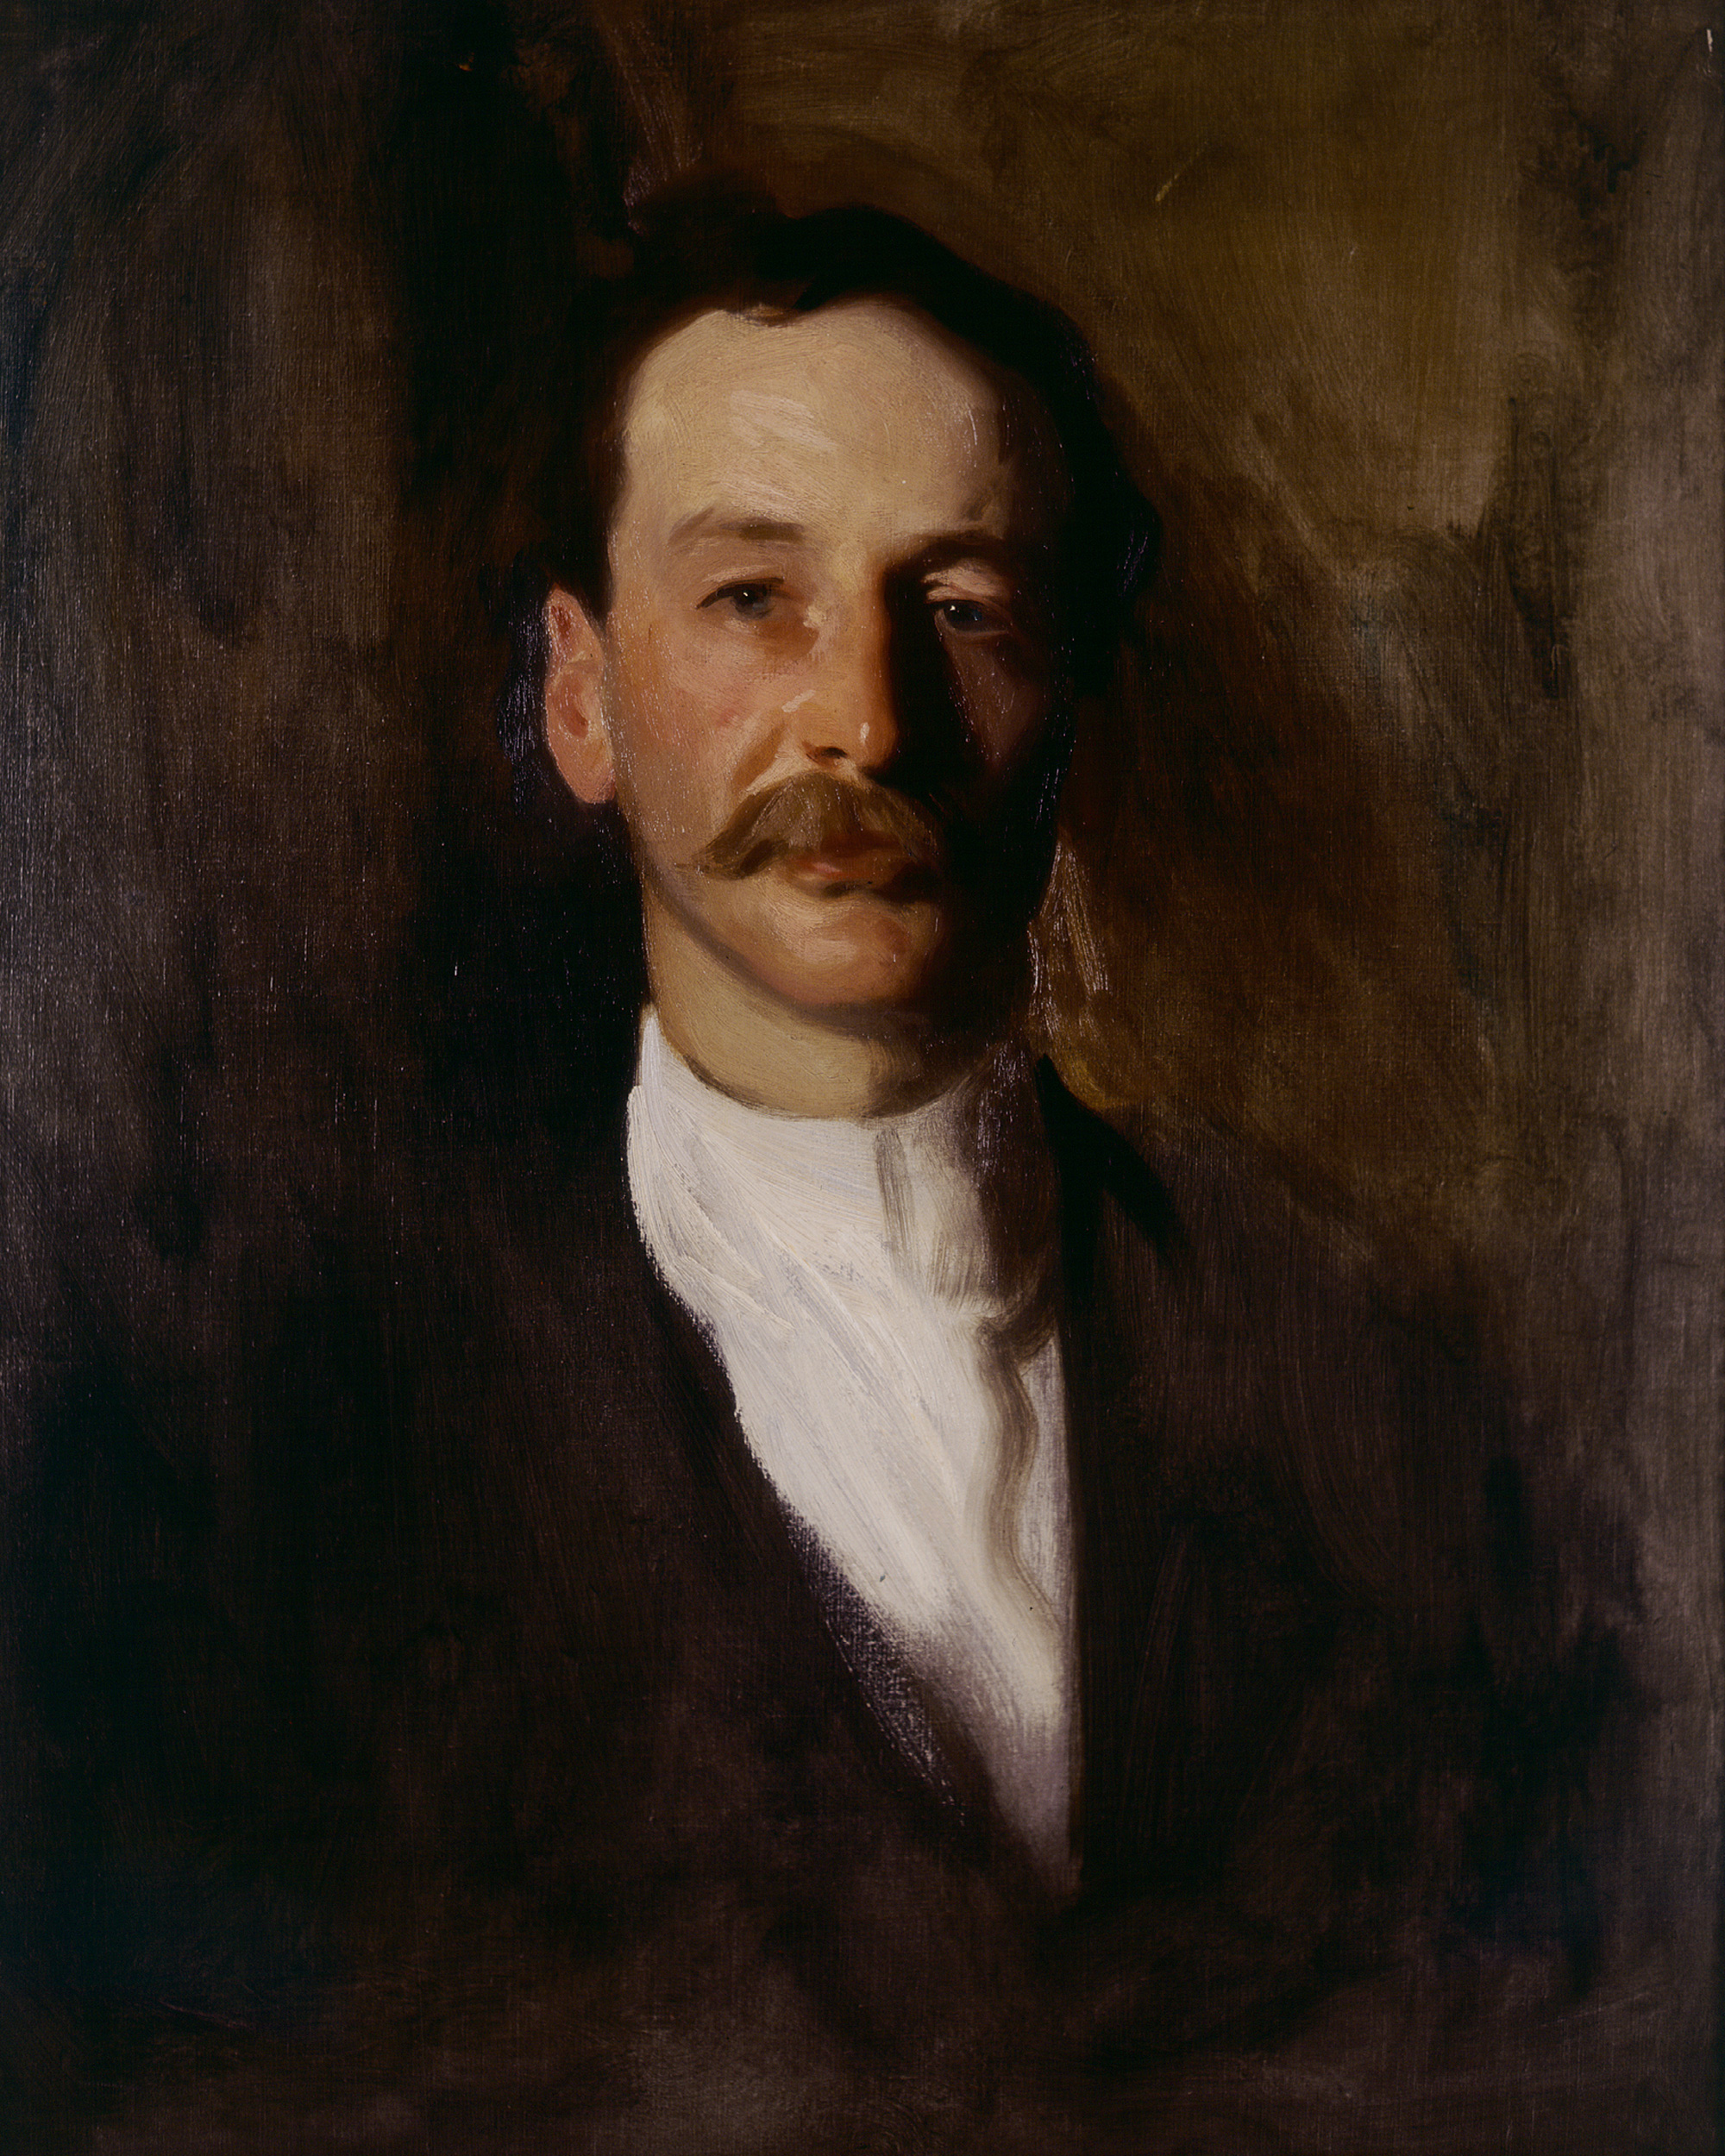 John Singer Sargent, Dr. Morton Prince, 1890. In Sargent’s depiction, Prince’s face seems to have two distinct halves that cannot easily be reconciled. Courtesy Tufts University Permanent Art Collection.